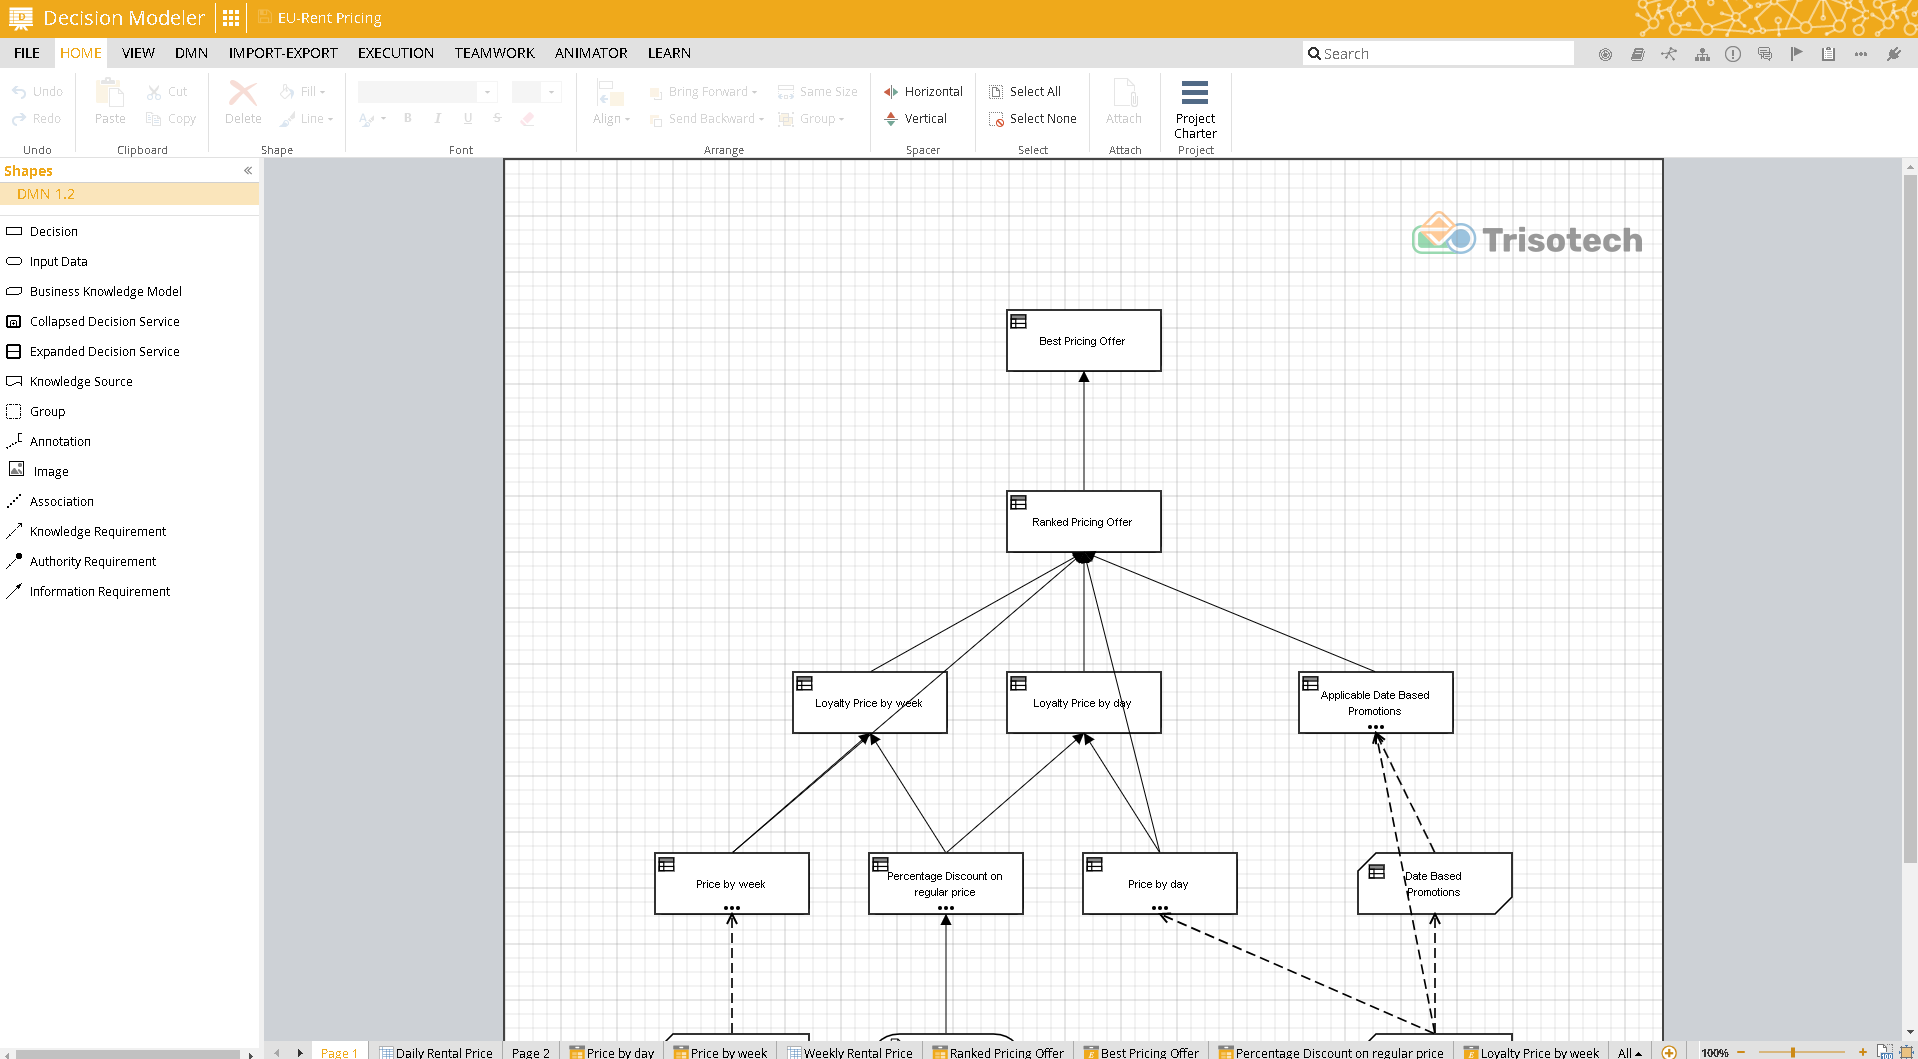 overview of the decision modeler